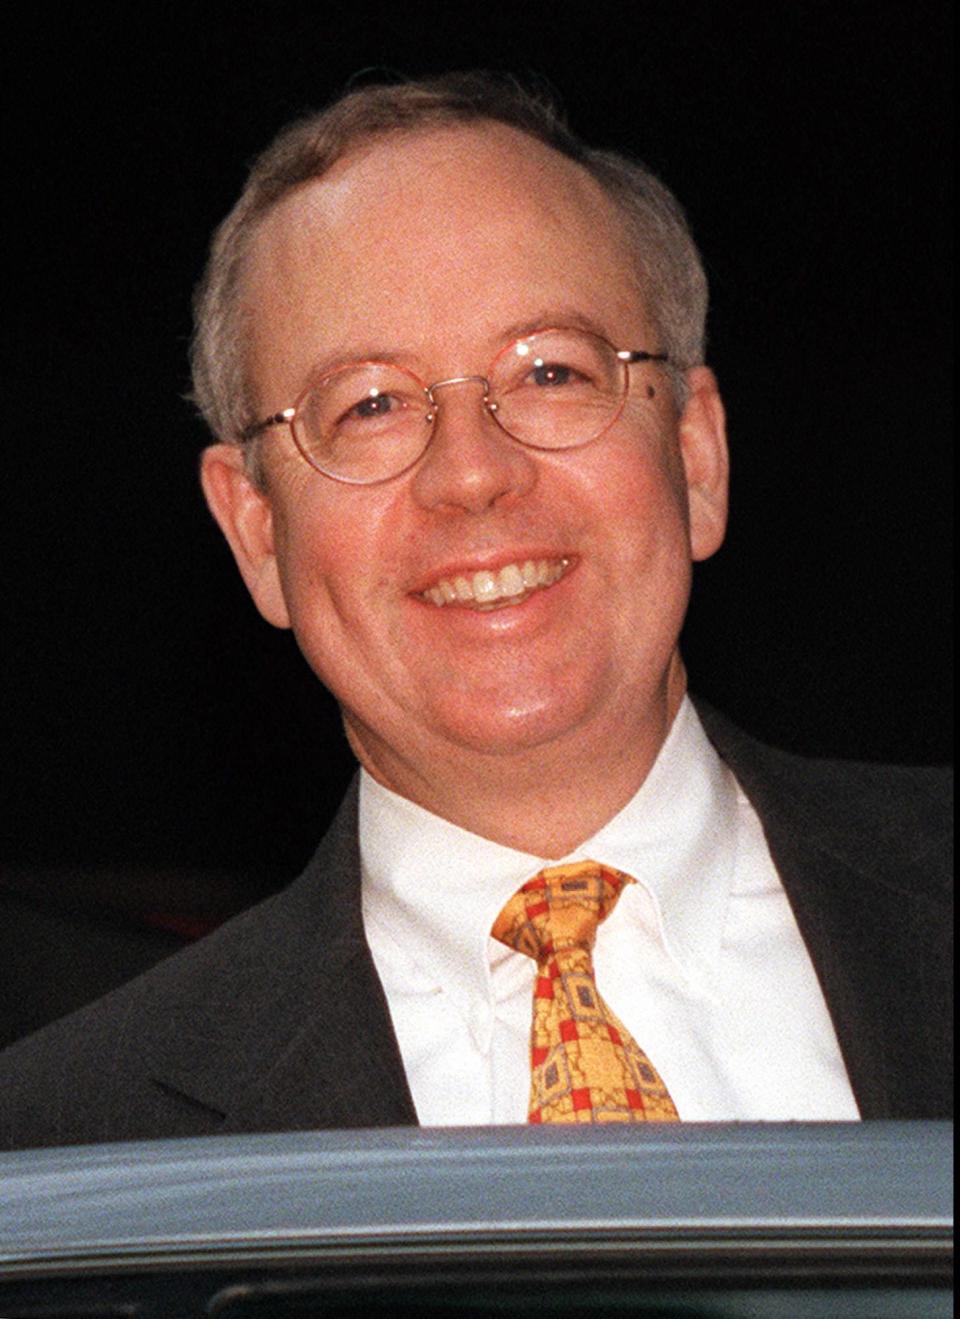 Kenneth Starr, once an independent counsel investigating Bill and Hillary Clinton, went on to represent Jeffrey Epstein